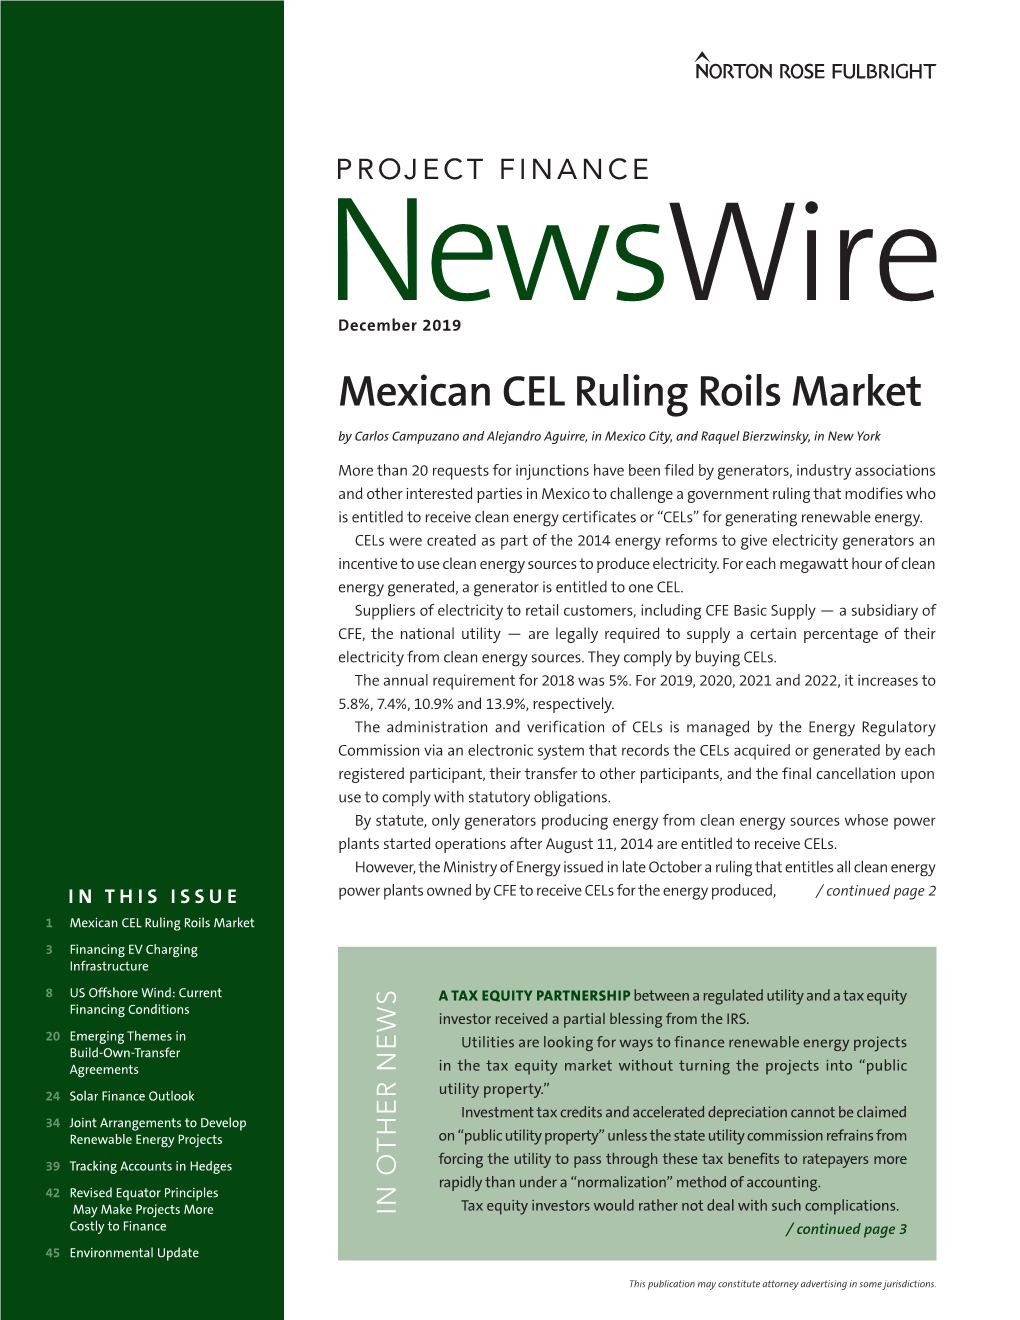 Mexican CEL Ruling Roils Market by Carlos Campuzano and Alejandro Aguirre, in Mexico City, and Raquel Bierzwinsky, in New York